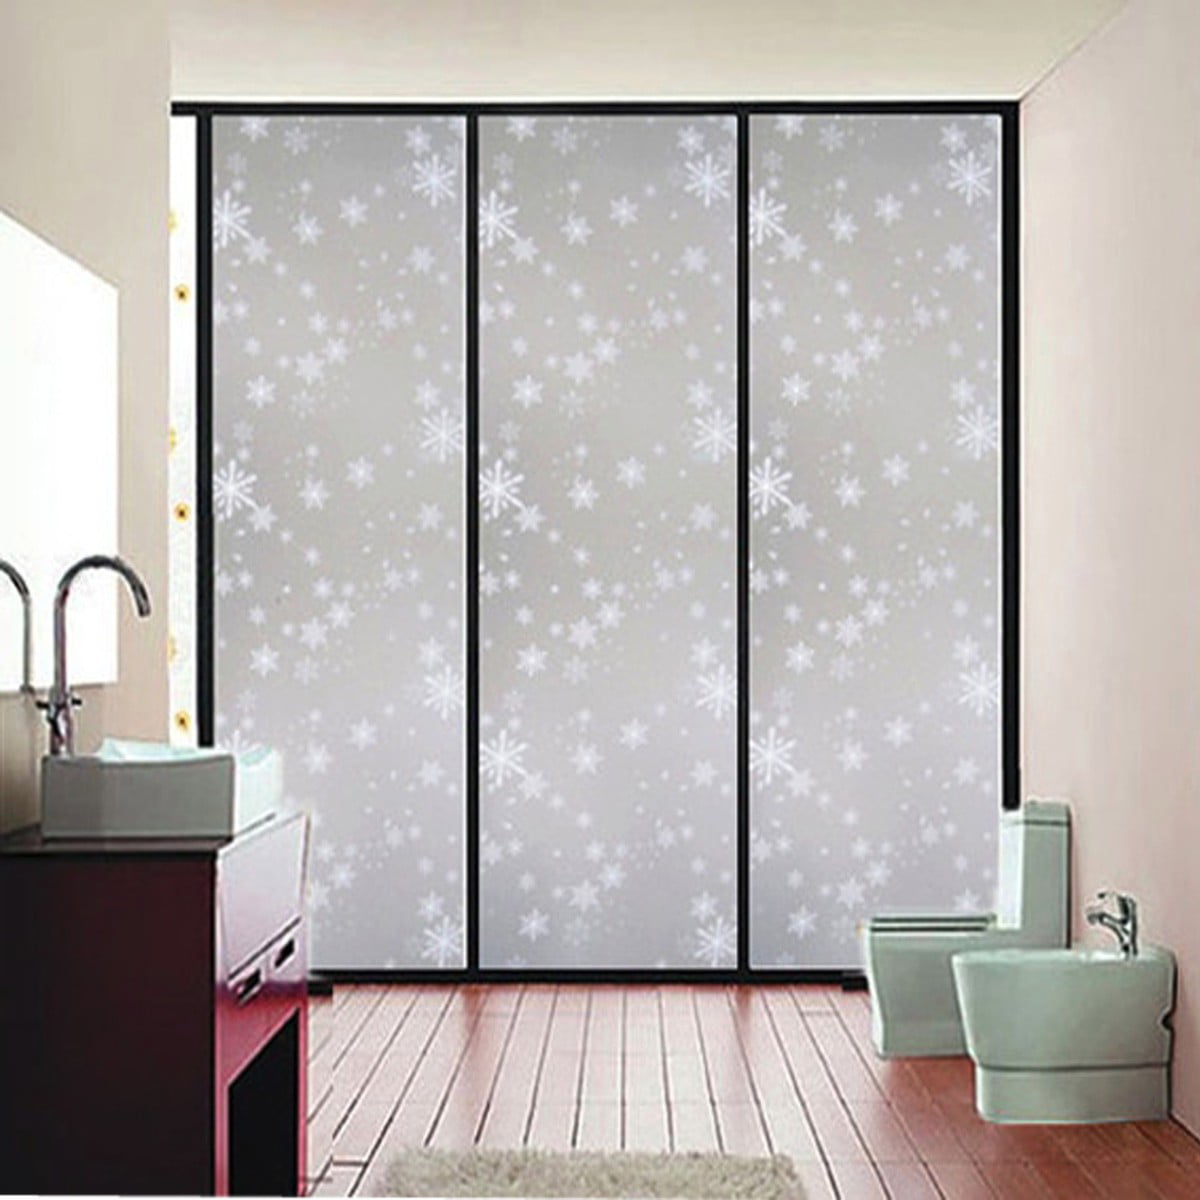 78" Privacy Frosted Window Glass Film Stickers Bathroom Door Decor Self Adhesive 